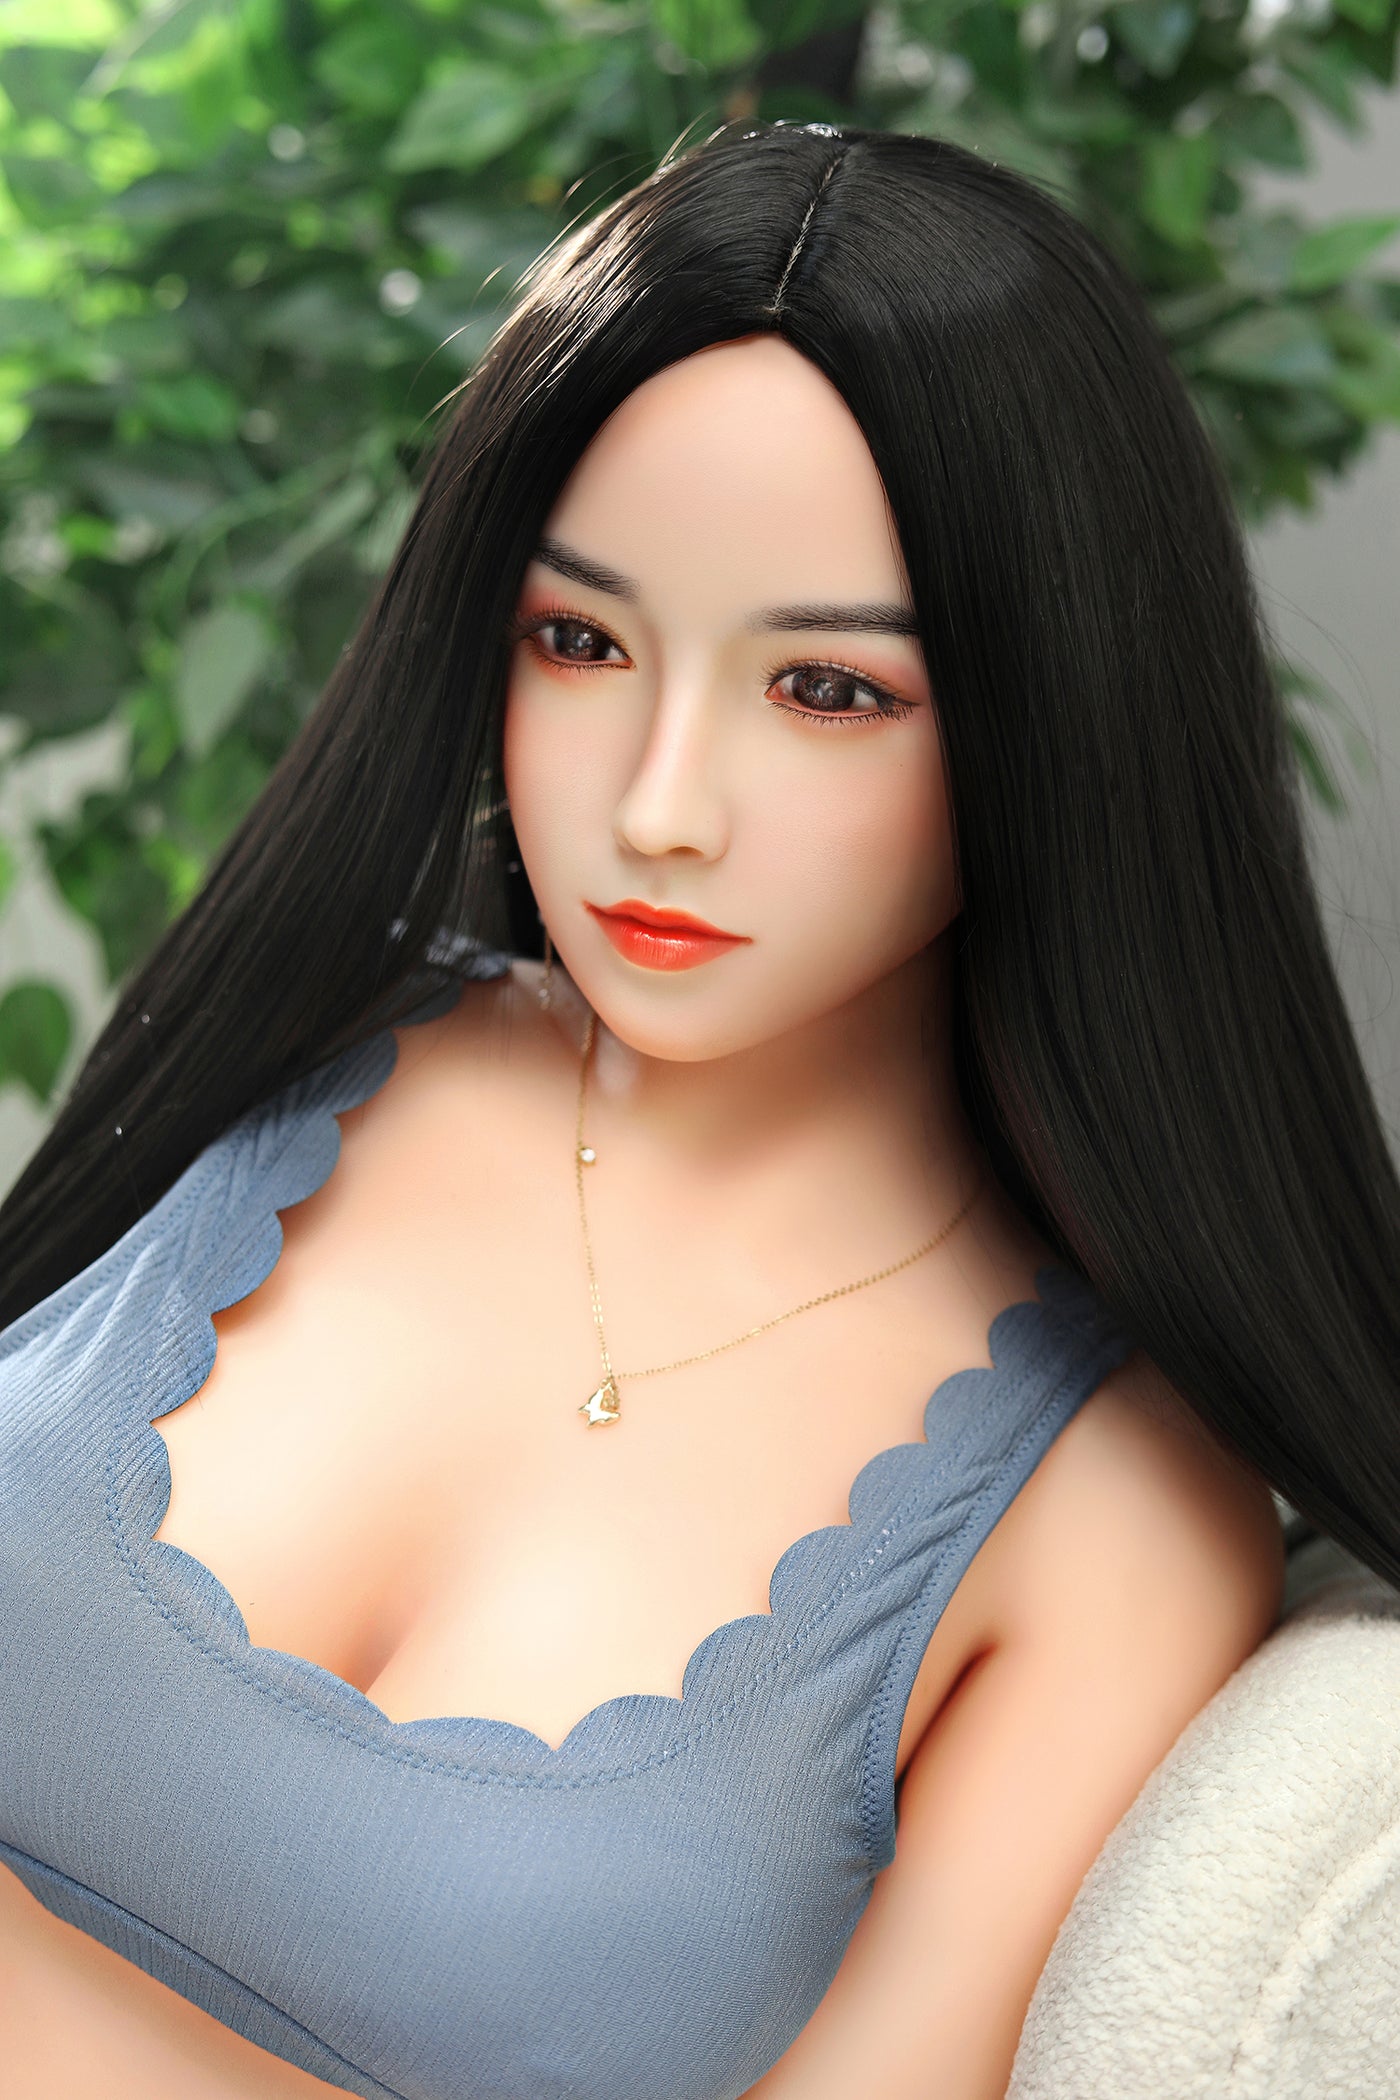 Margaret - 5ft2in (158cm) Cute Face Thin Lady Realistic Sex Doll